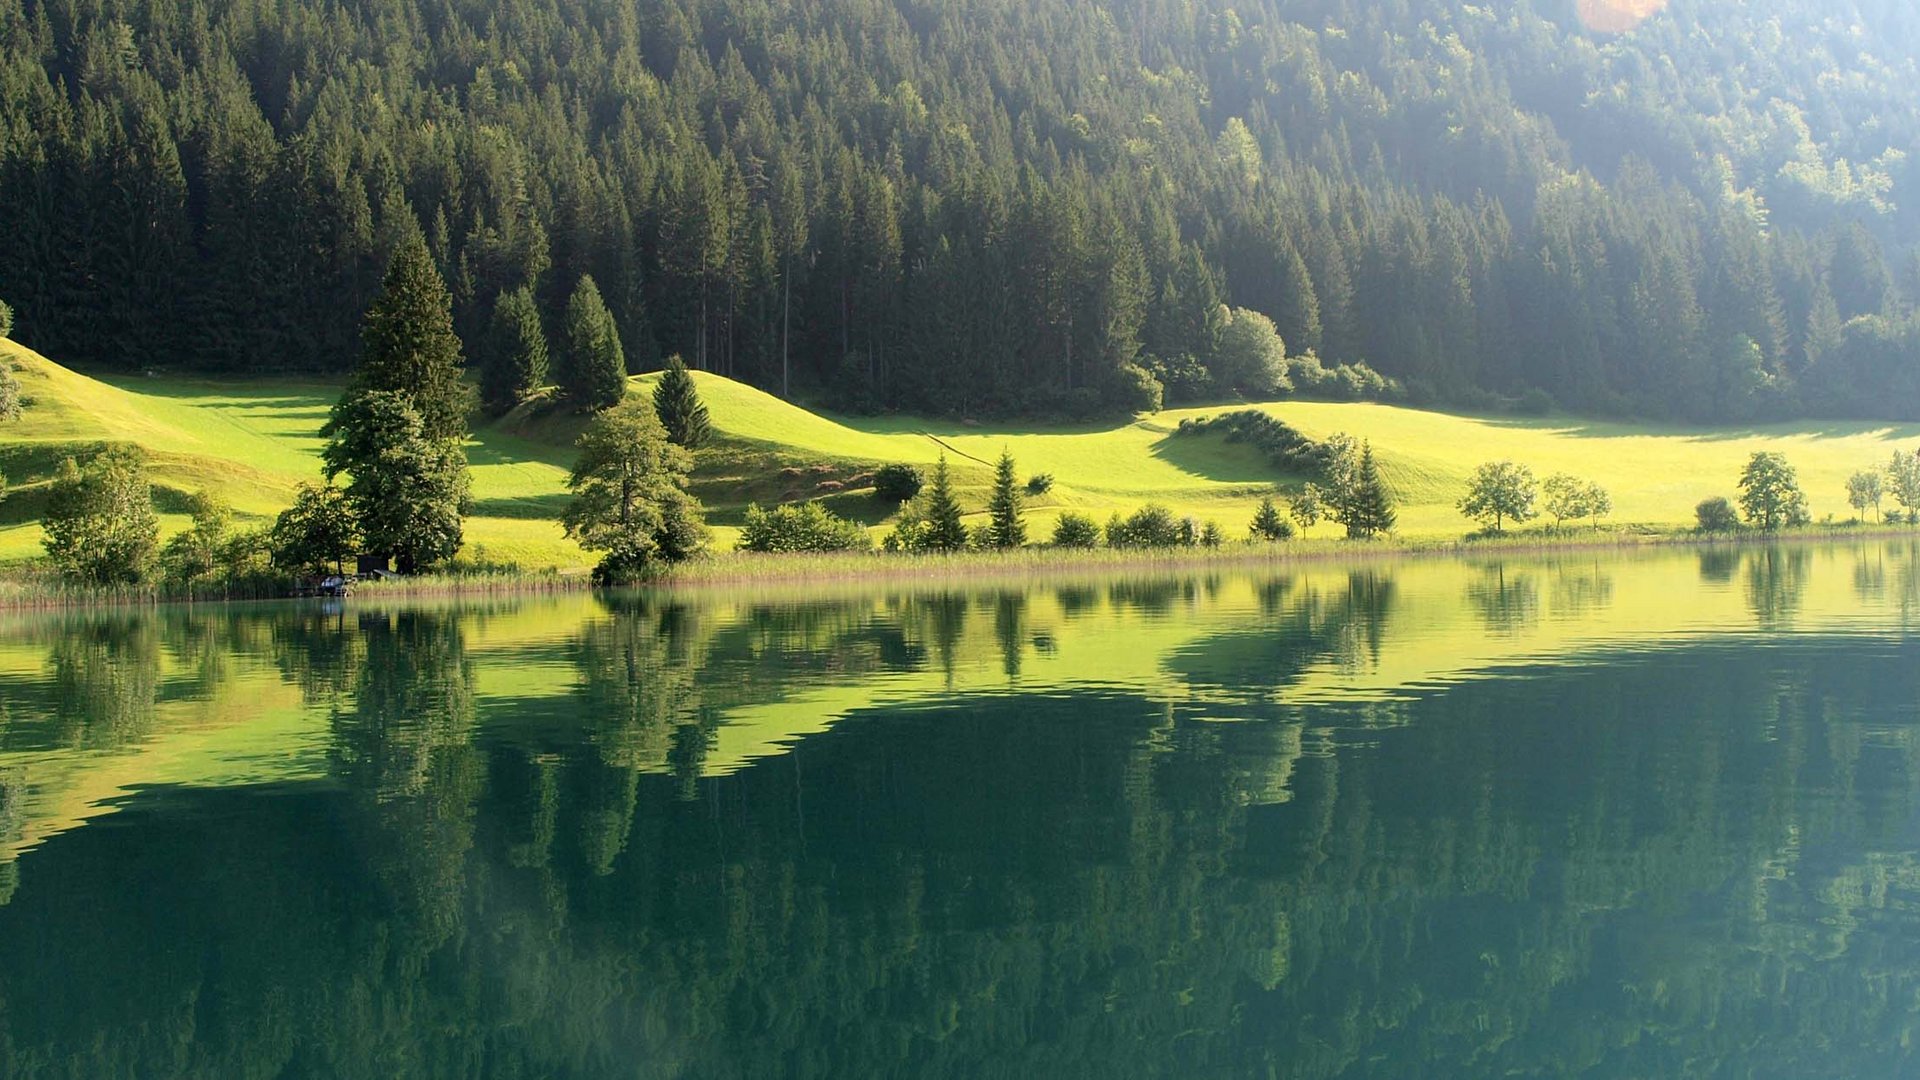 Alpine Pearls – a car-free holiday in the Alps